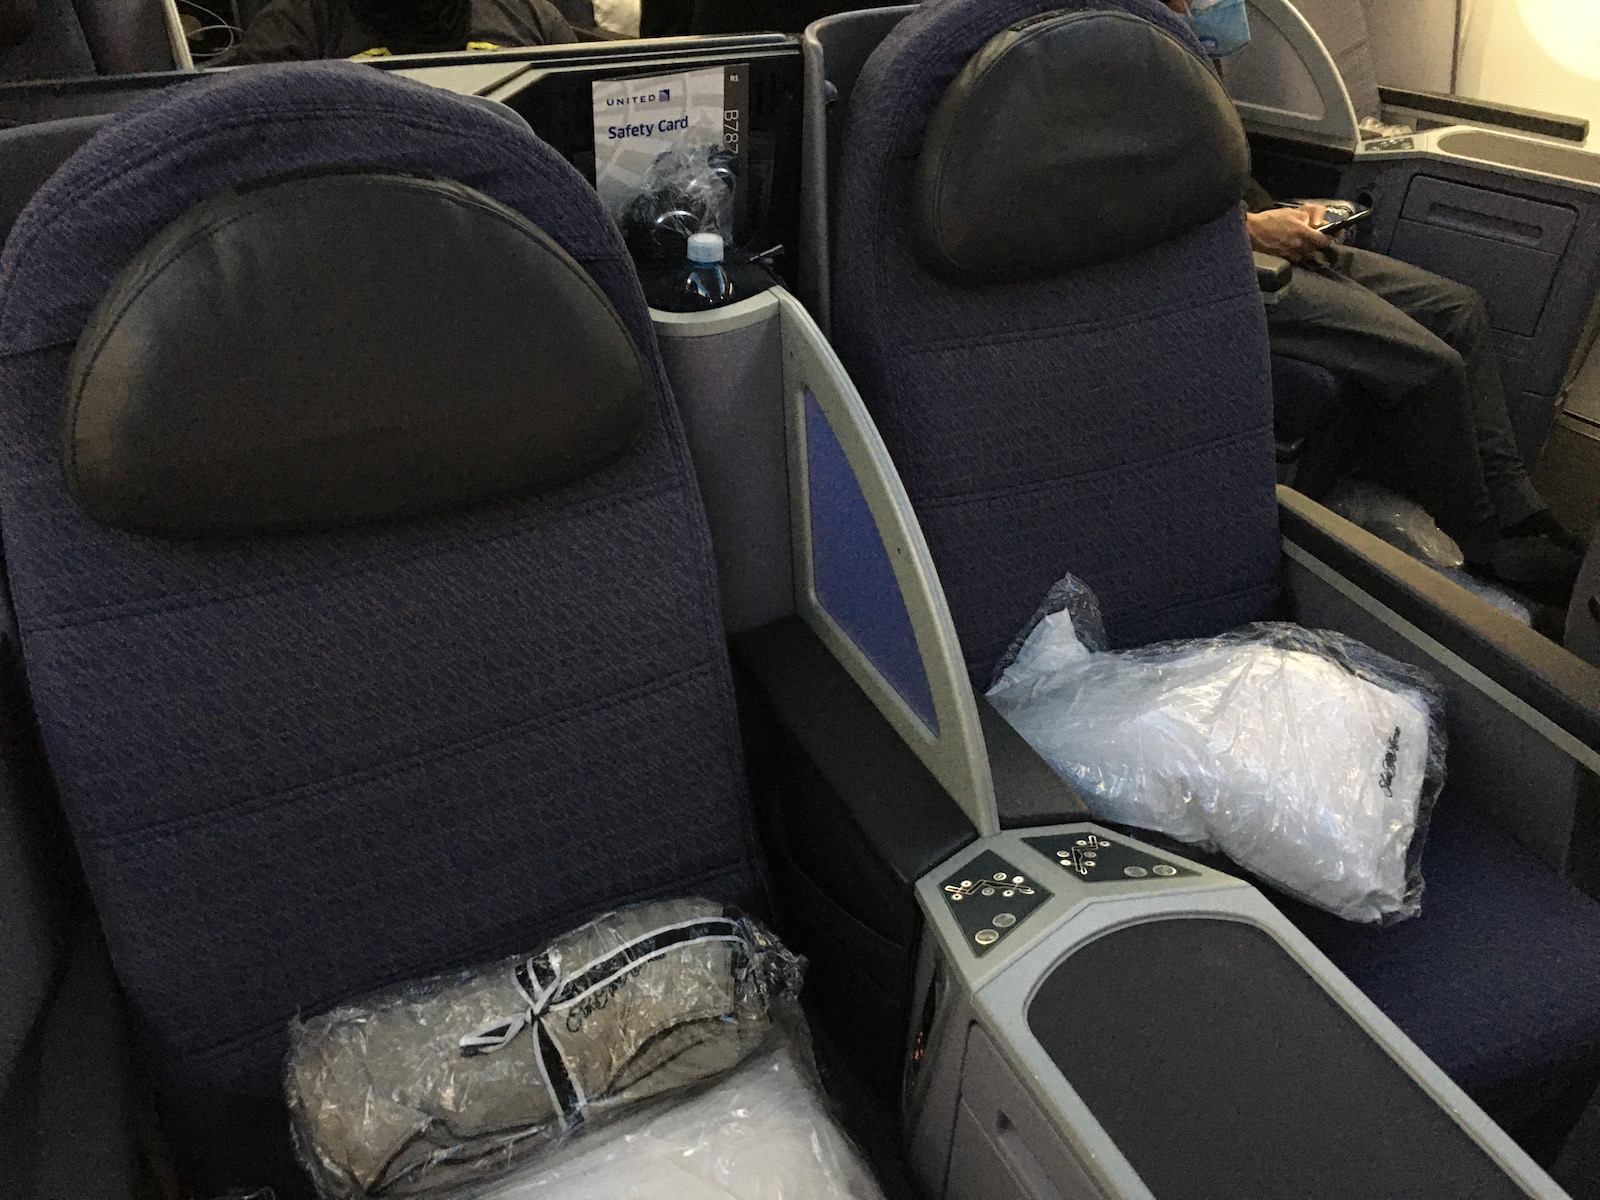 United Polaris business class review on 787 Dreamliner